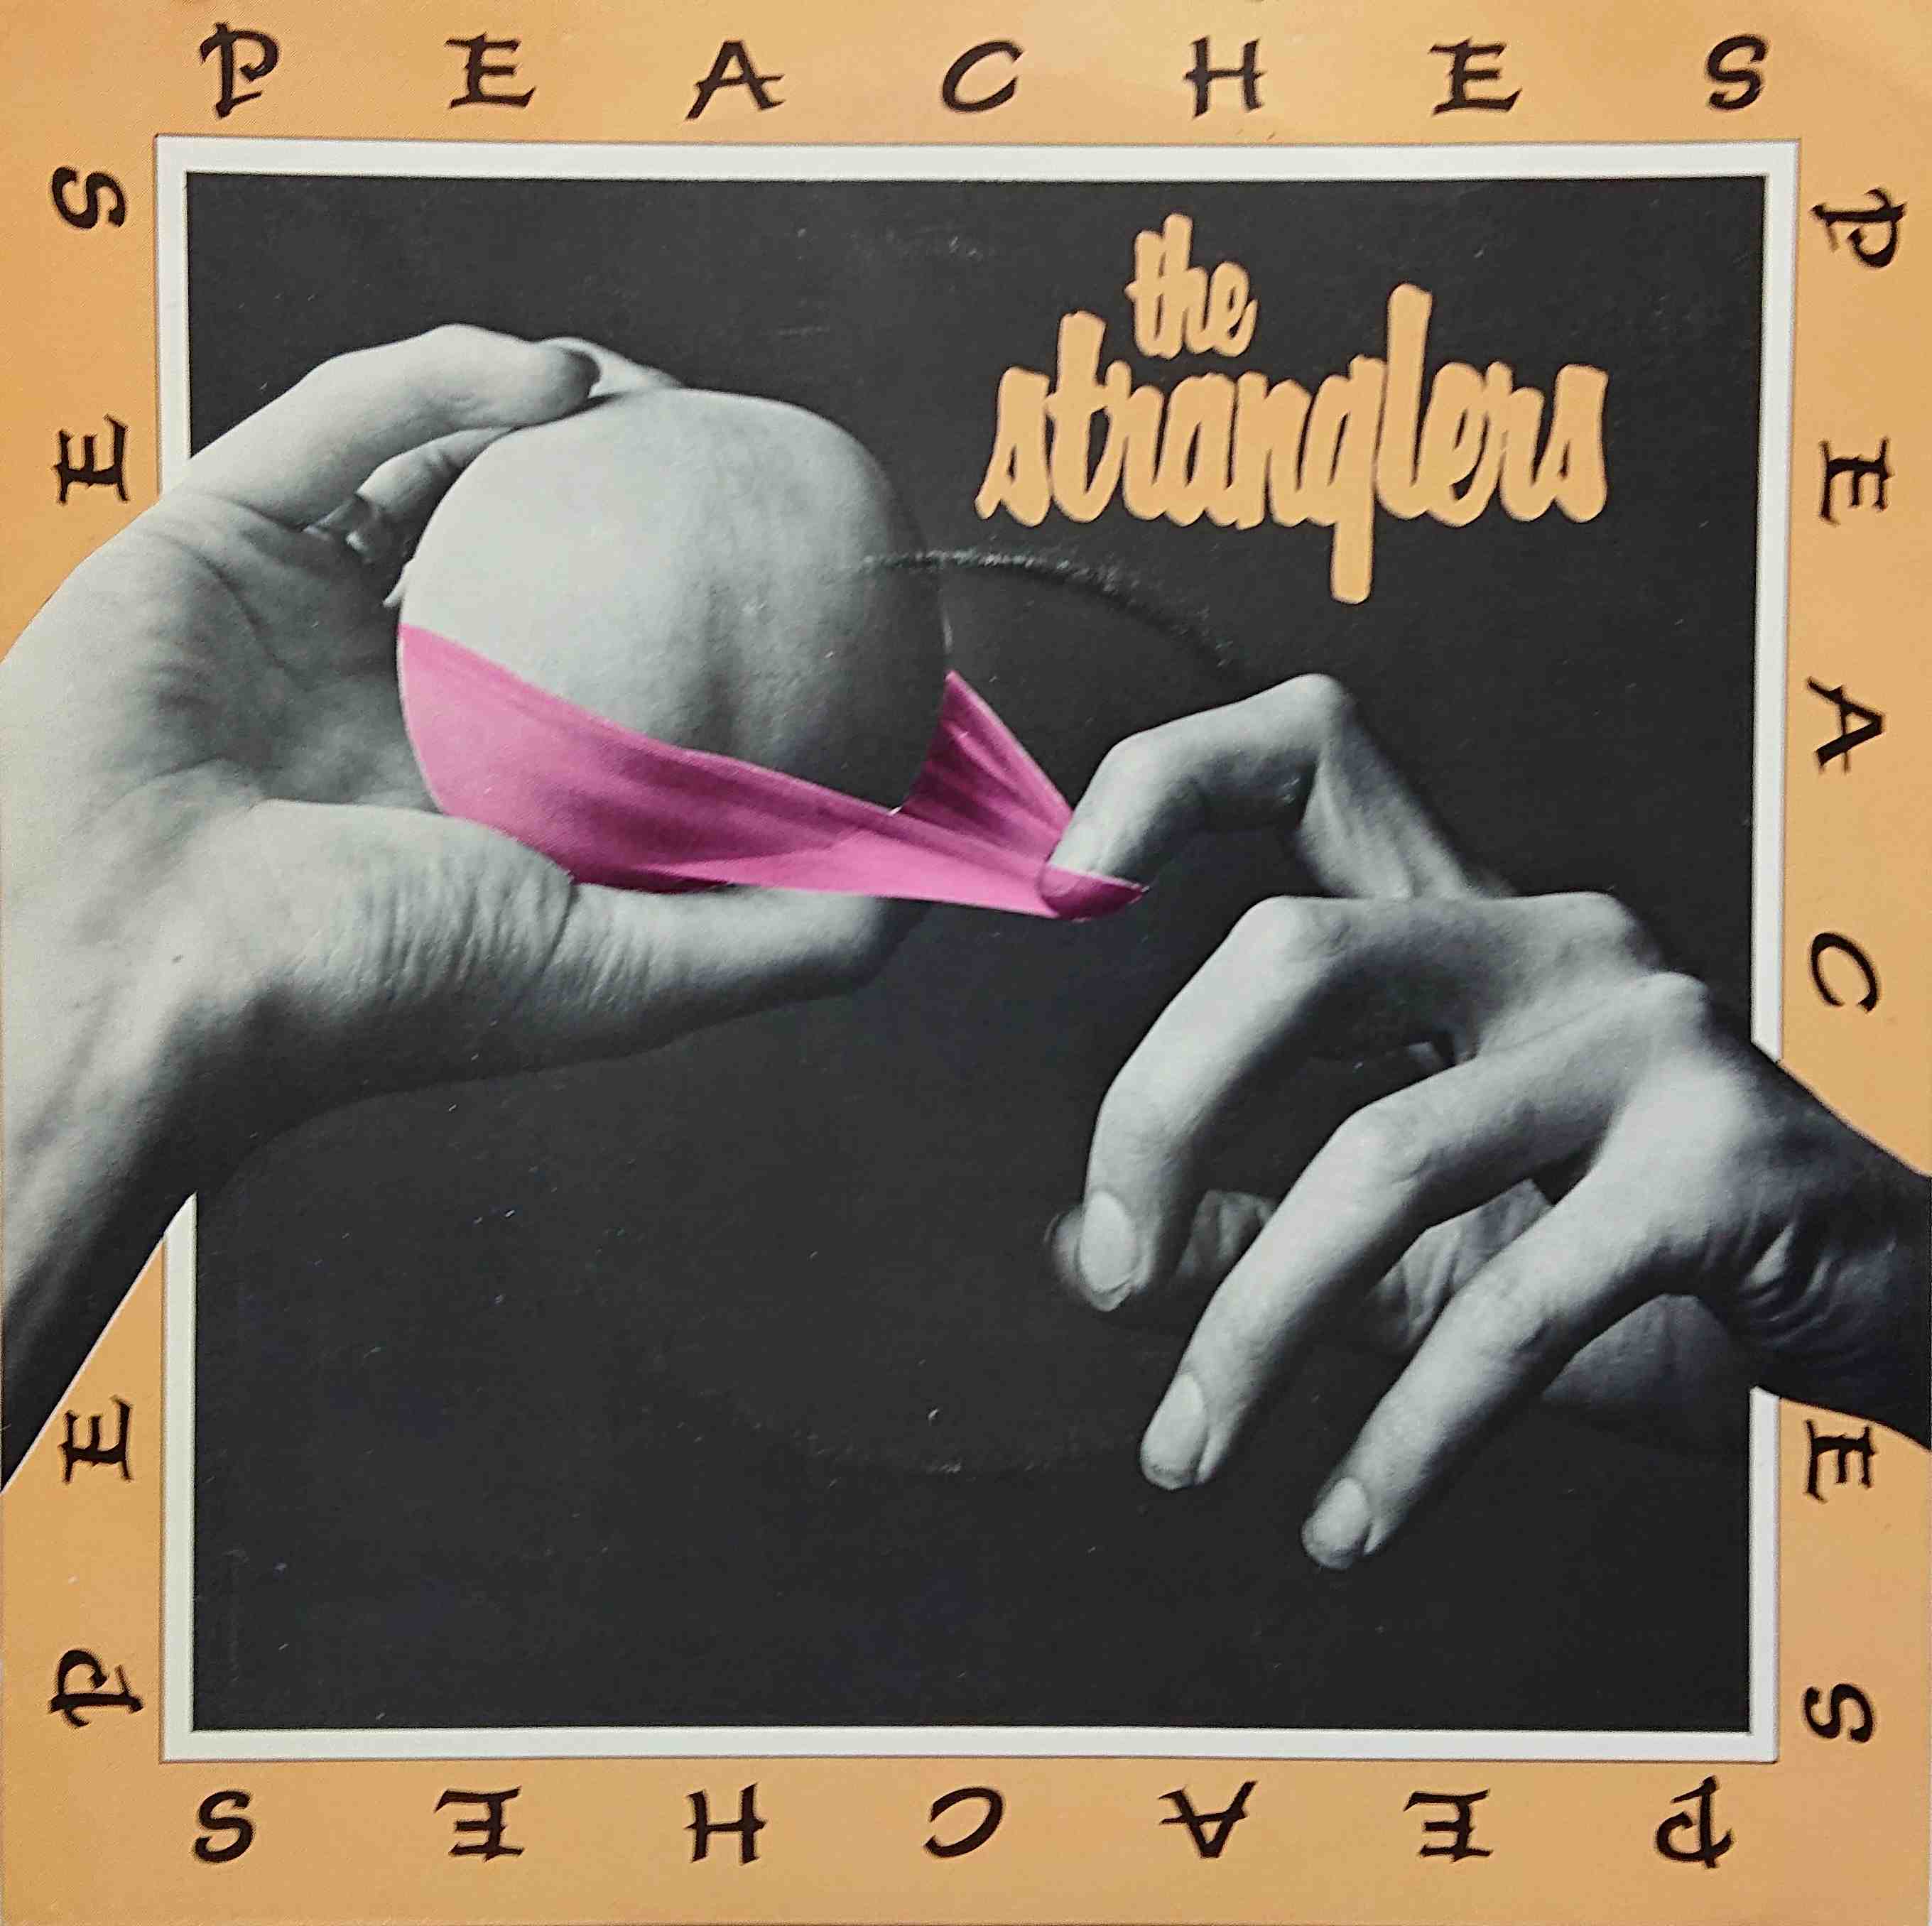 Picture of Peaches by artist The Stranglers  from The Stranglers singles